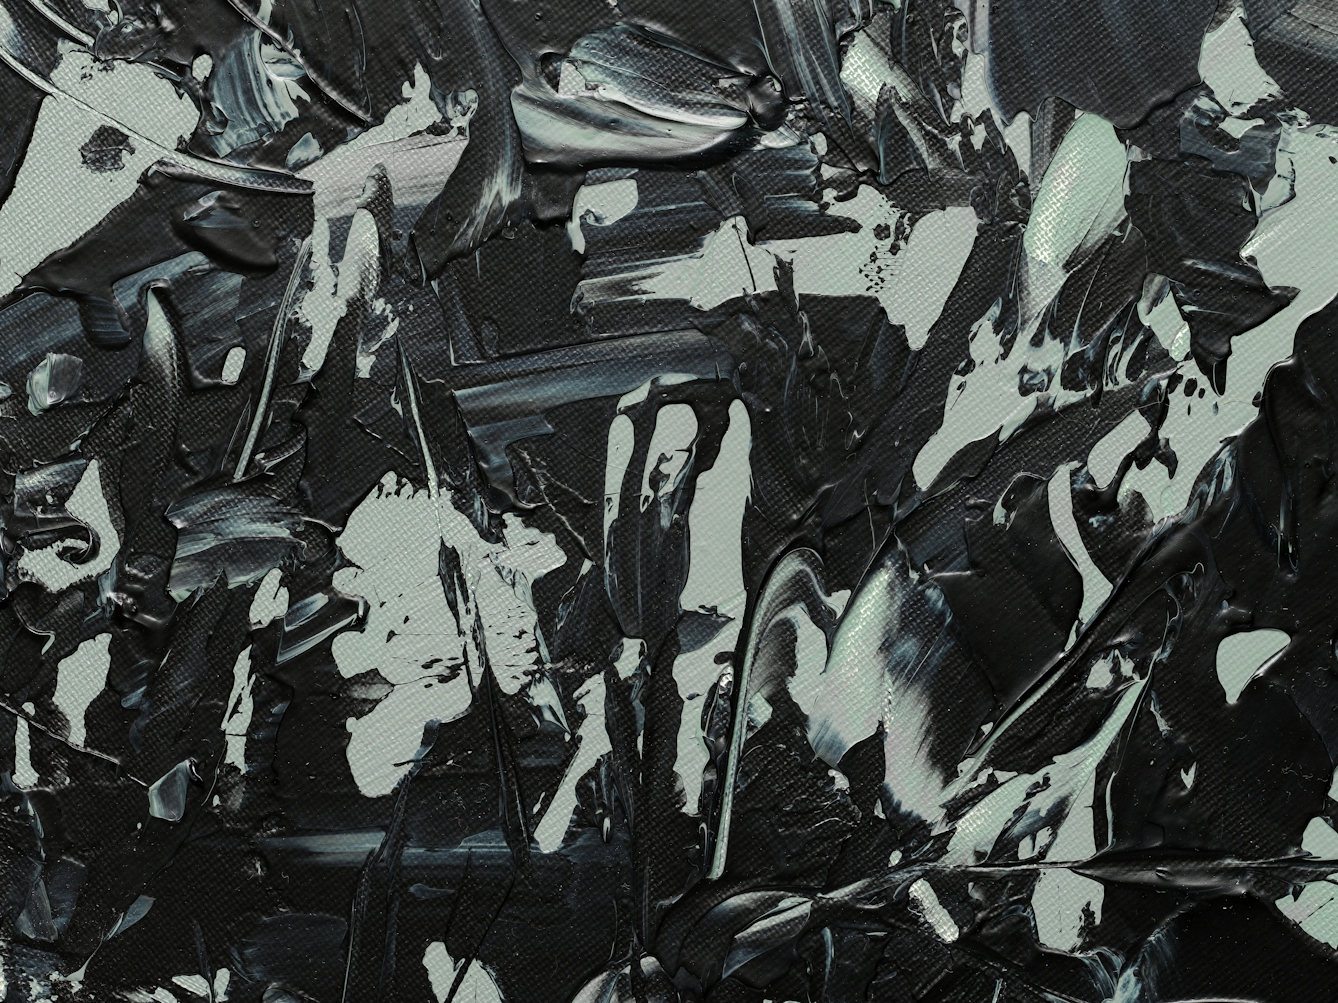 Photograph of close-up detail of a larger abstract expressionist painting on a large circular canvas, titled 'Binaries'. It is predominantly monochrome. The background layer is completely covered with grey and green-grey hues. Textural qualities have been captured in the acrylic paint including impressions made by deep brush strokes and gathered, layered paint. Black expressionist marks, created with a palette knife, scatter across the surface and begin to accumulate towards one side of the canvas. Some marks include waves of banded black and grey. The black marks are reminiscent of a murder of crows, with their onyx wings stretching and taking flight.